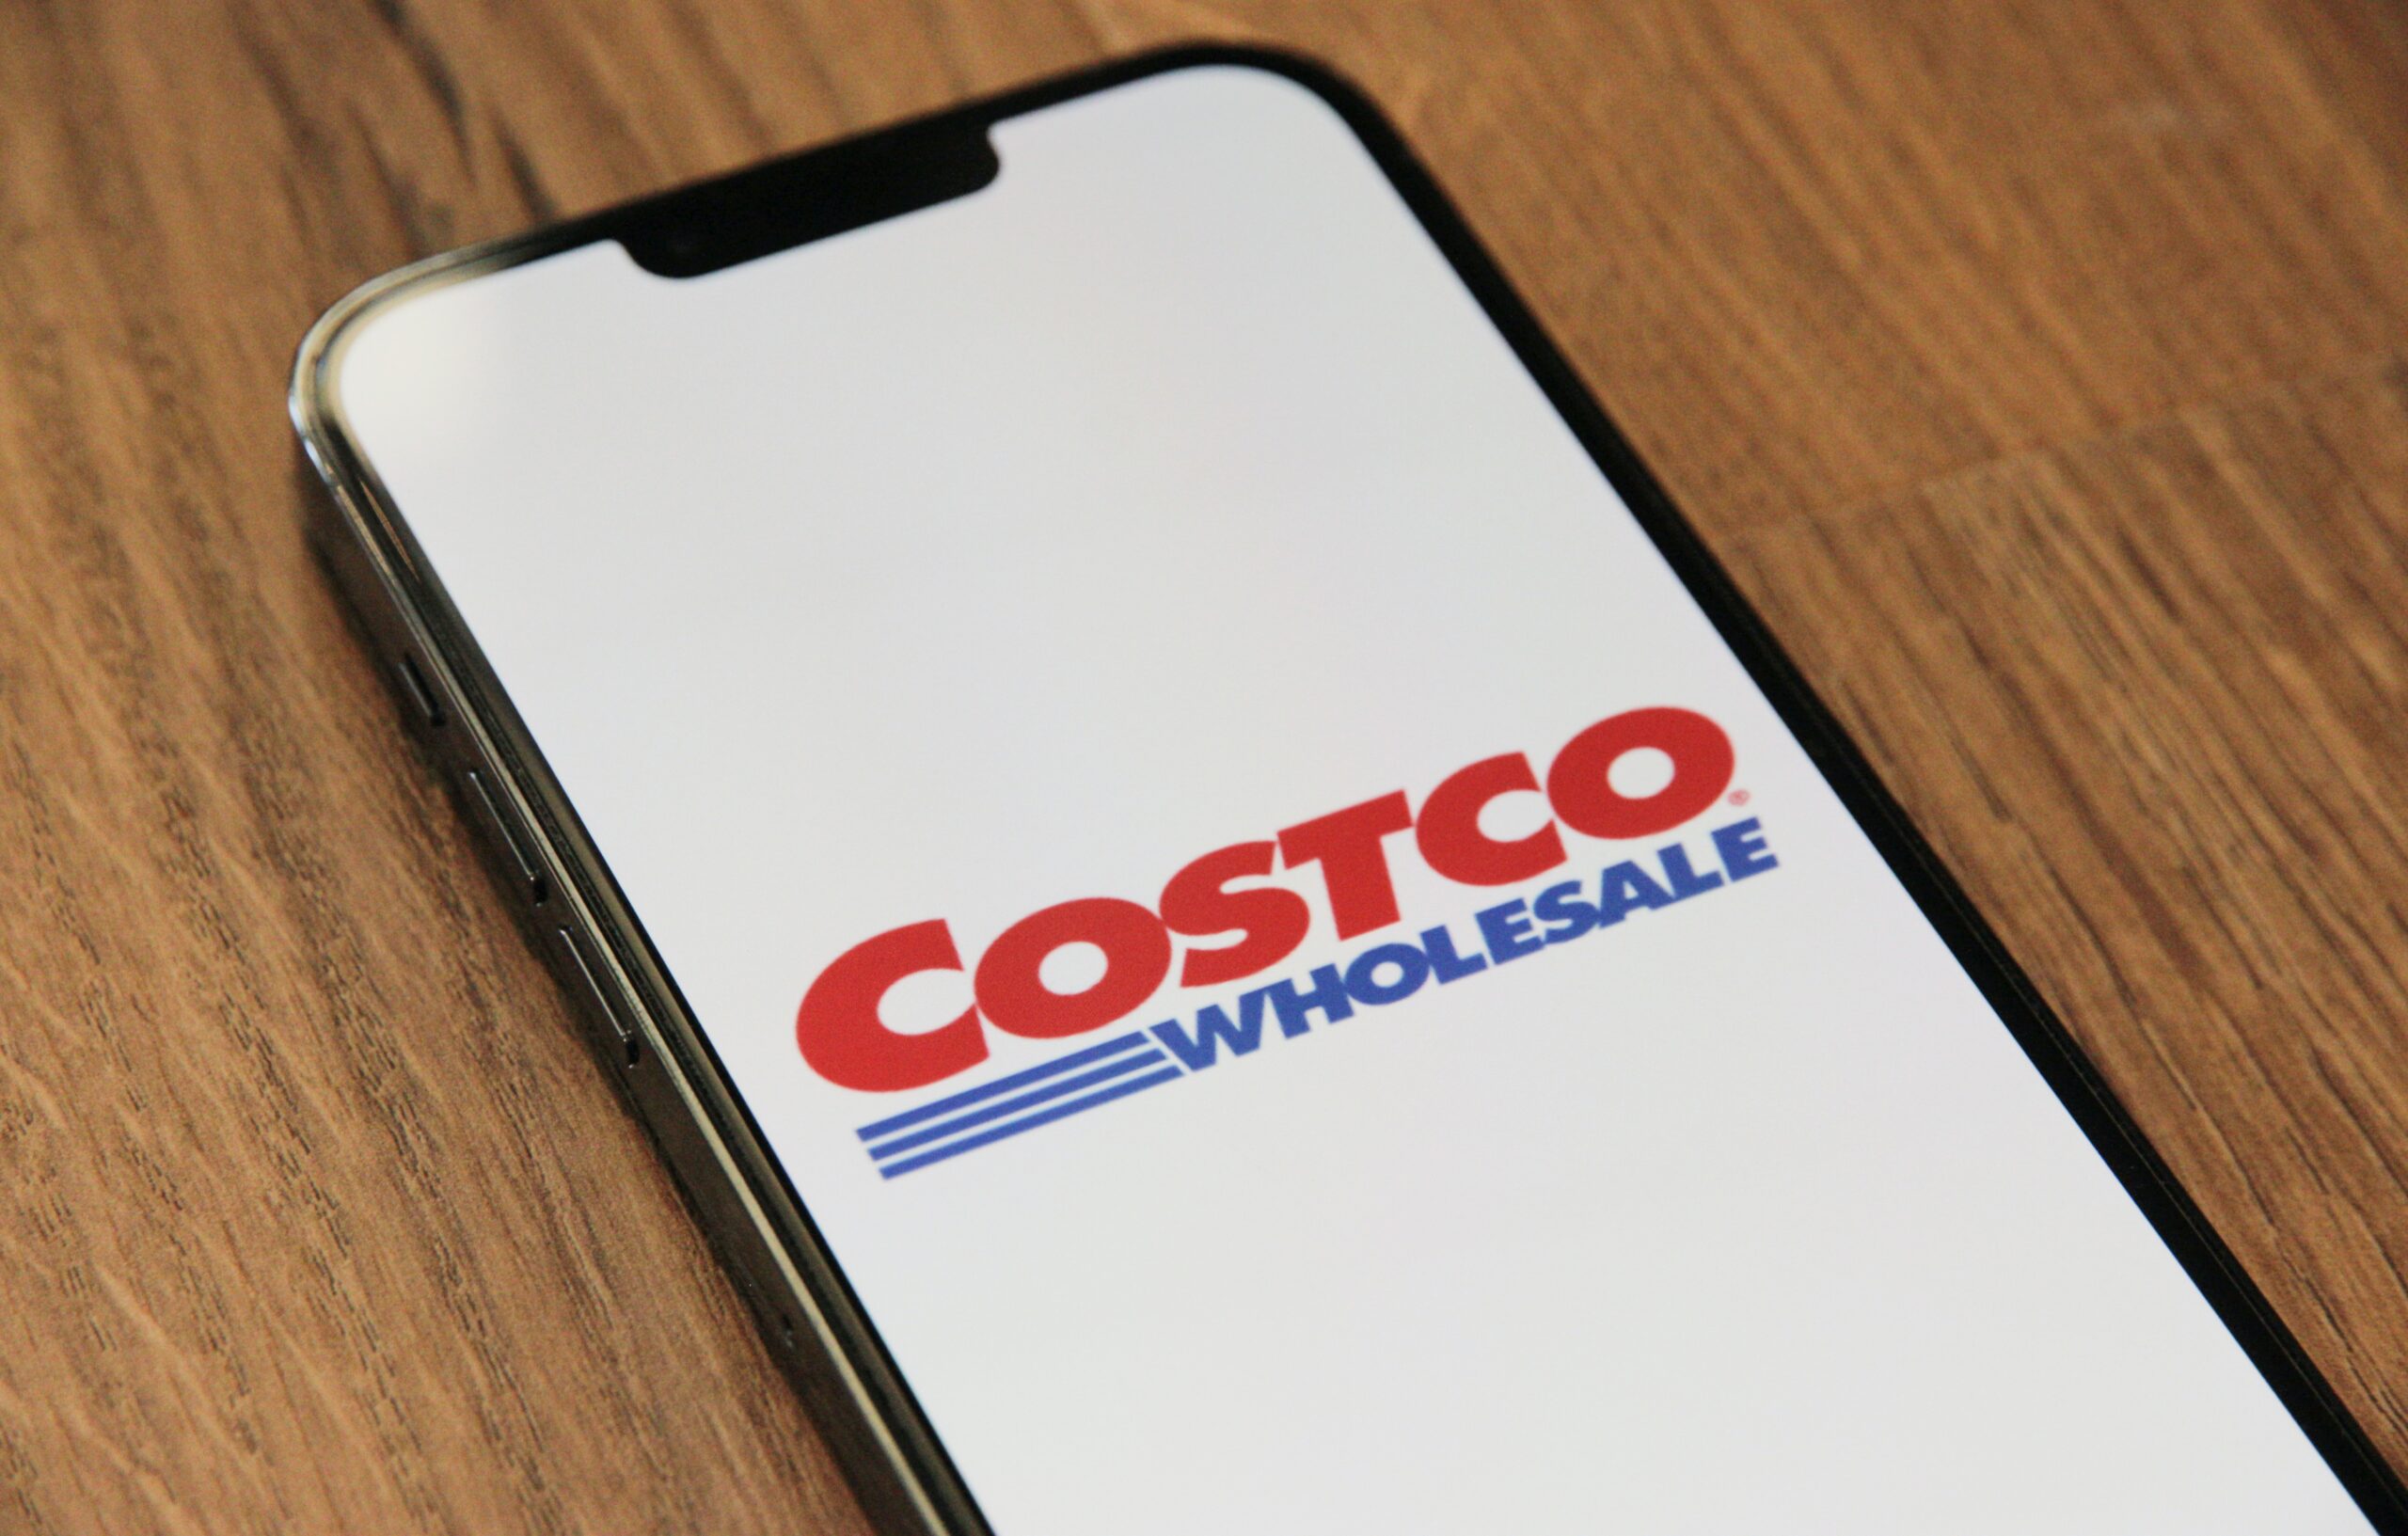 Costco website on mobile representing a termination of an employee